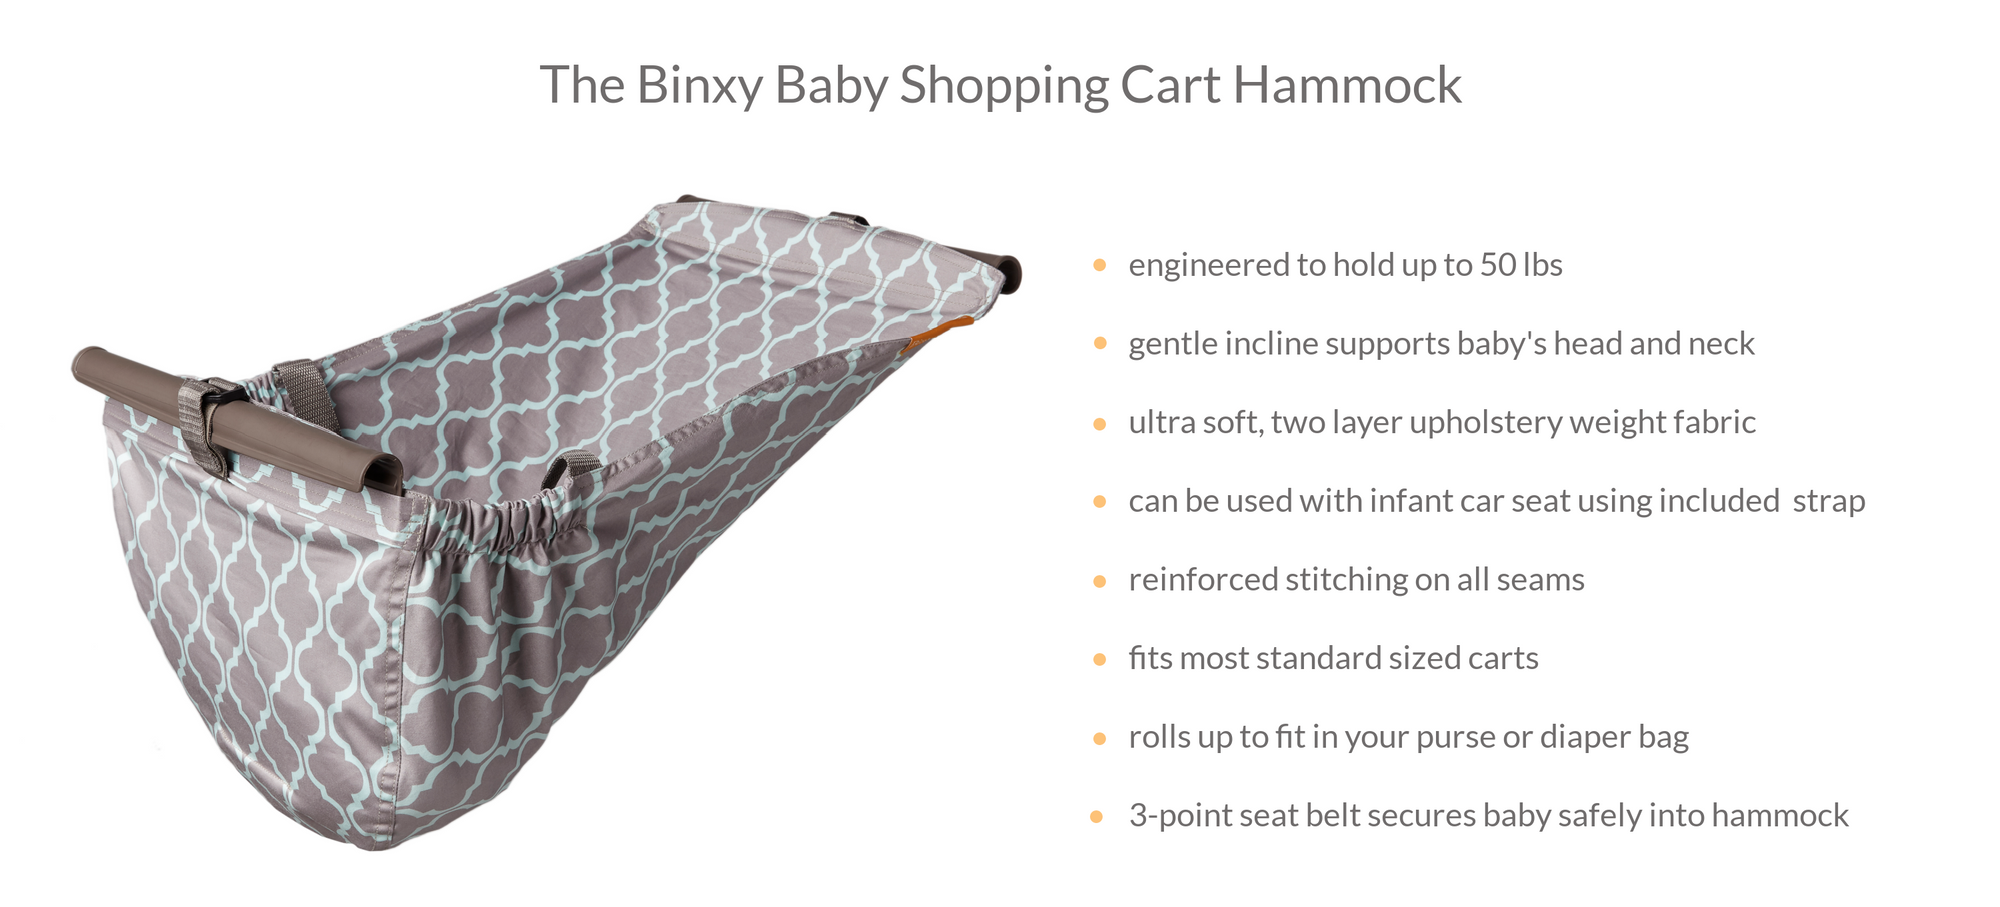 The Binxy Baby Shopping Cart Hammock is engineered to hold up to 50 lbs. Gentle incline supports baby's head and neck. Ultra soft, two layer upholstery weight fabric. Can be used with infant car seat. Reinforced stitching. Fits most standard sized carts.